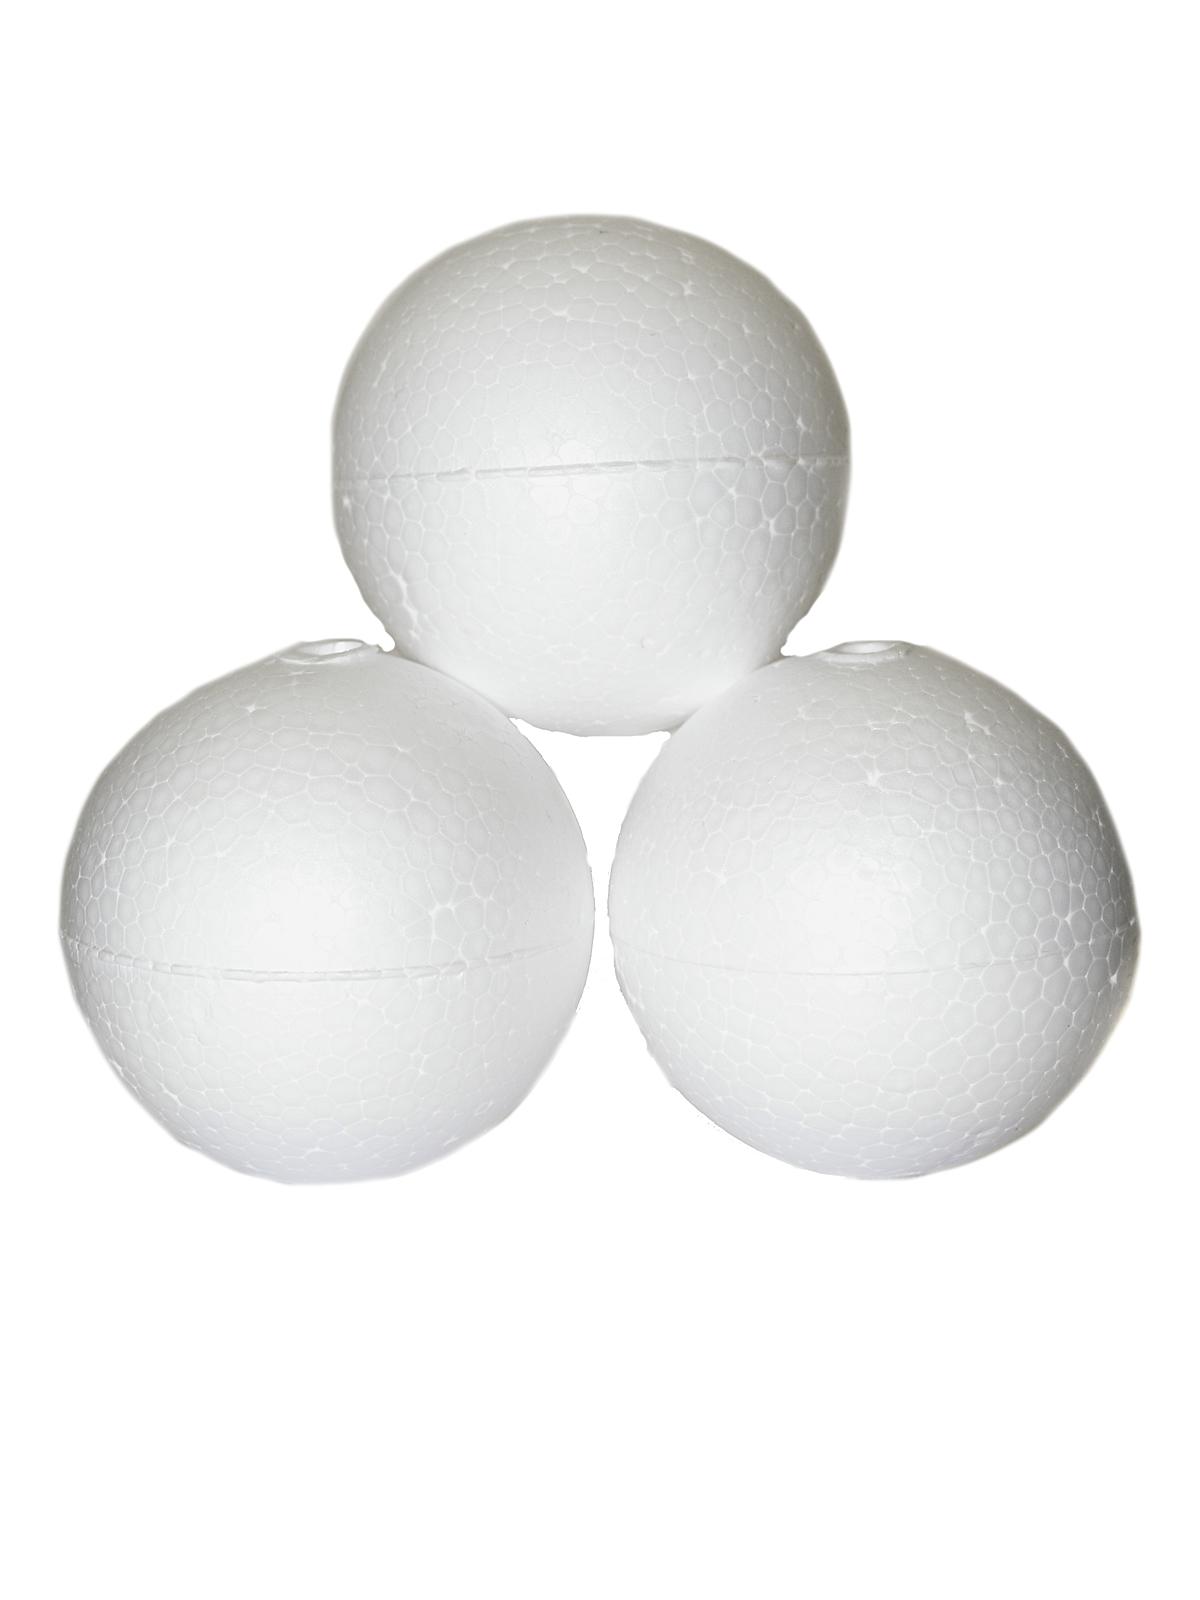 Craft Foam Shapes Ball 2 In. Pack Of 12